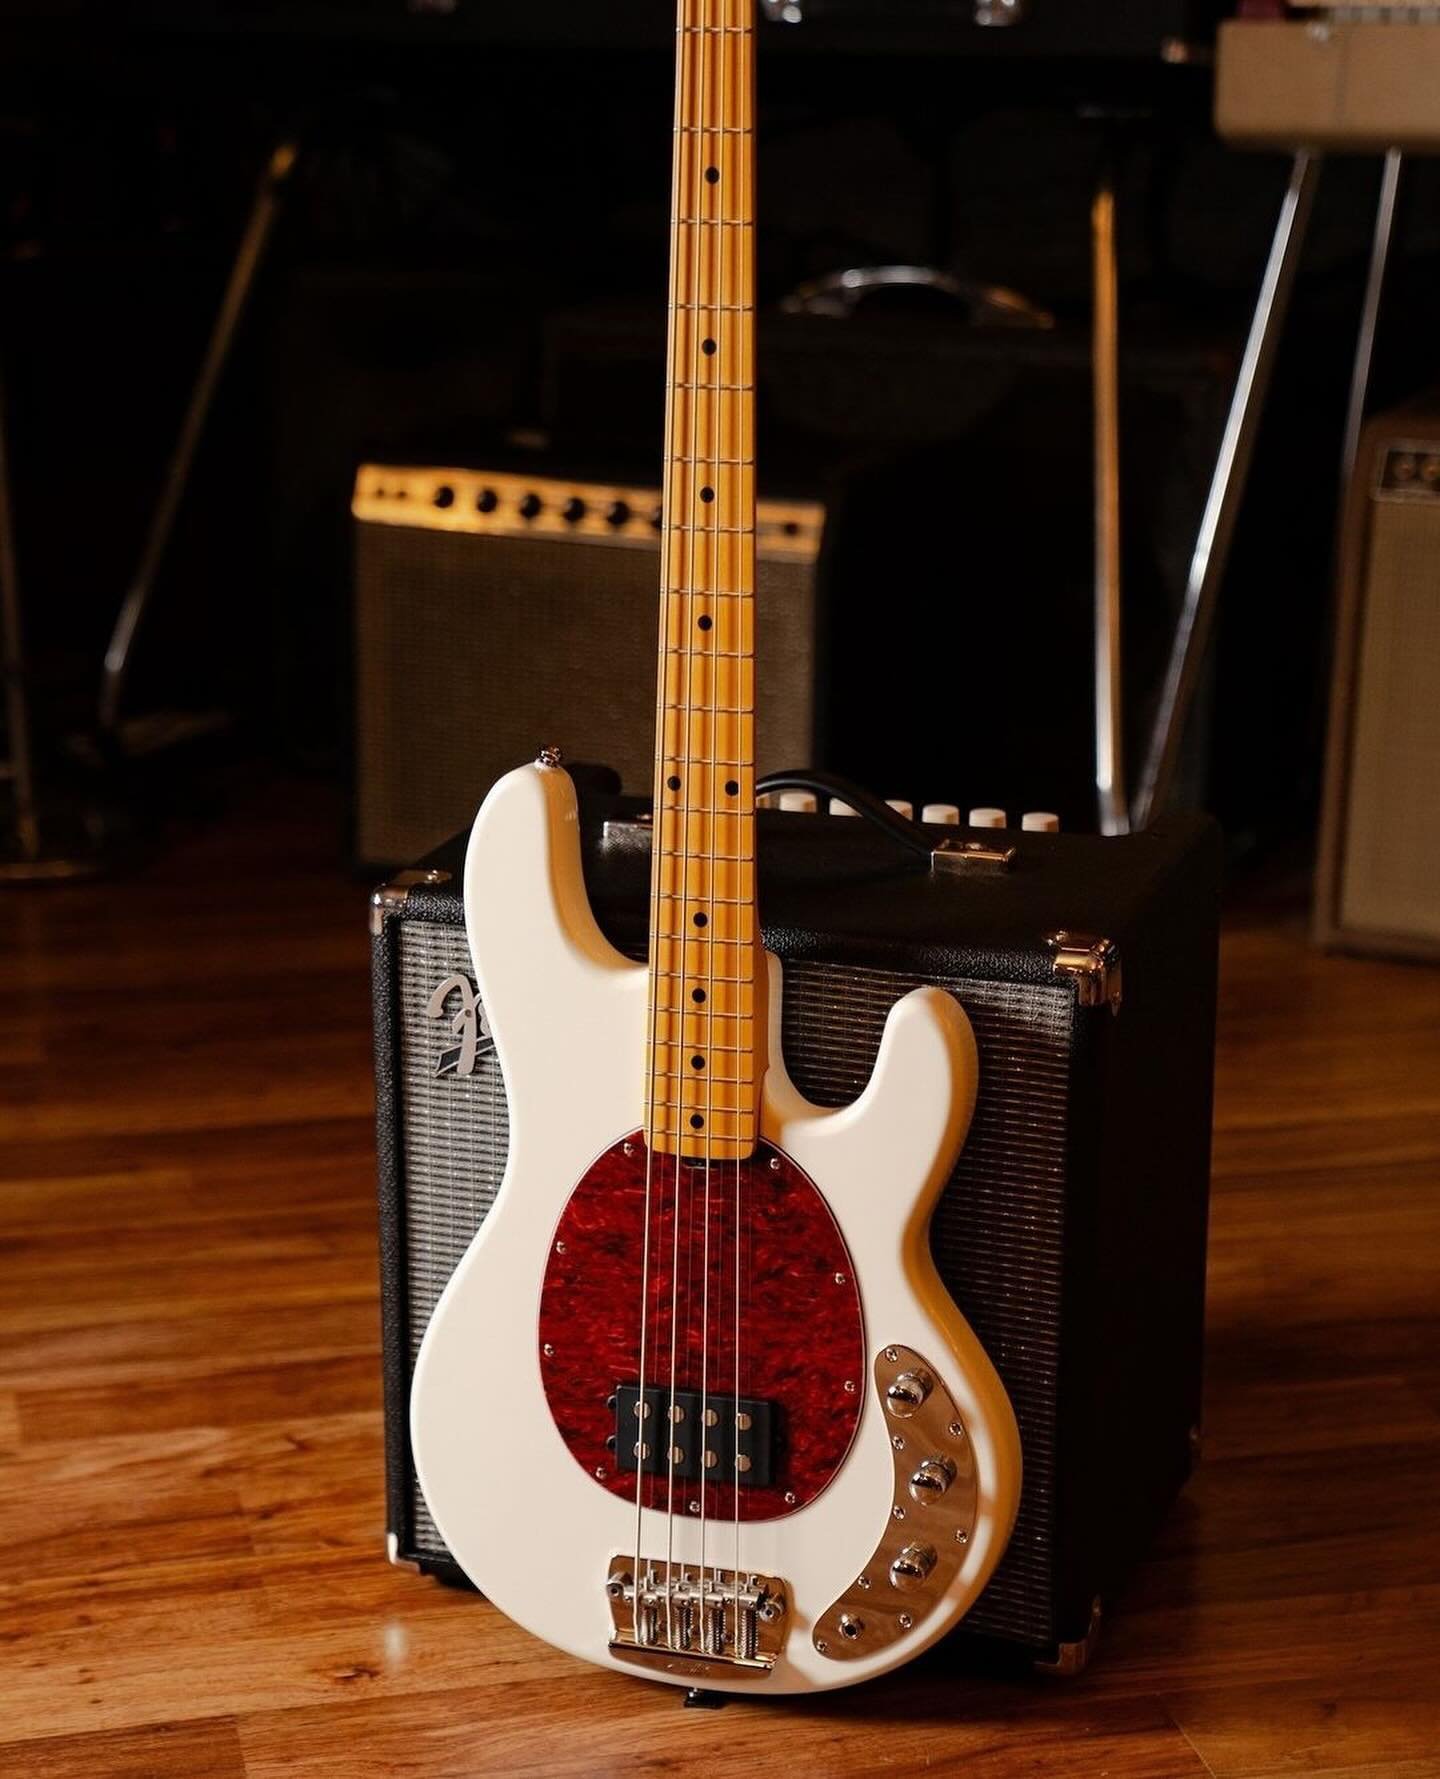 A StingRay that takes you back to the beginning &ndash; the @sterlingbymusicman Ray24 Classic.
&nbsp;
#sterling #sterlingbymusicman #stingray #ray24 #guitars #bassguitar #bassist #bassistsofinstagram #algambenelux